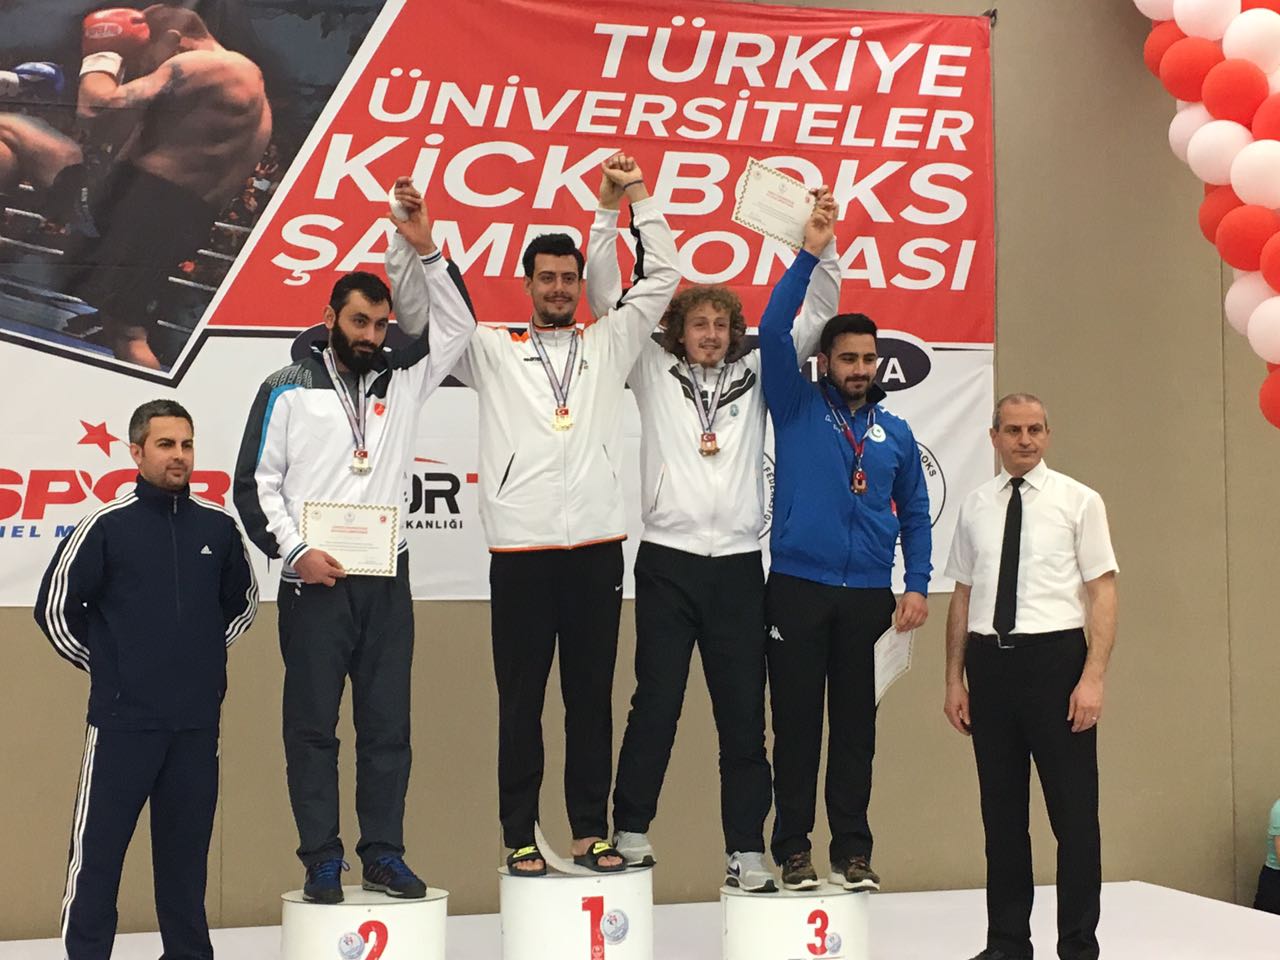 Gazette ETÜ Had a Chat With Aygün Gençay, a Student of The Political Science Department, Who Is Also The Inter-University Kickboxing Champion